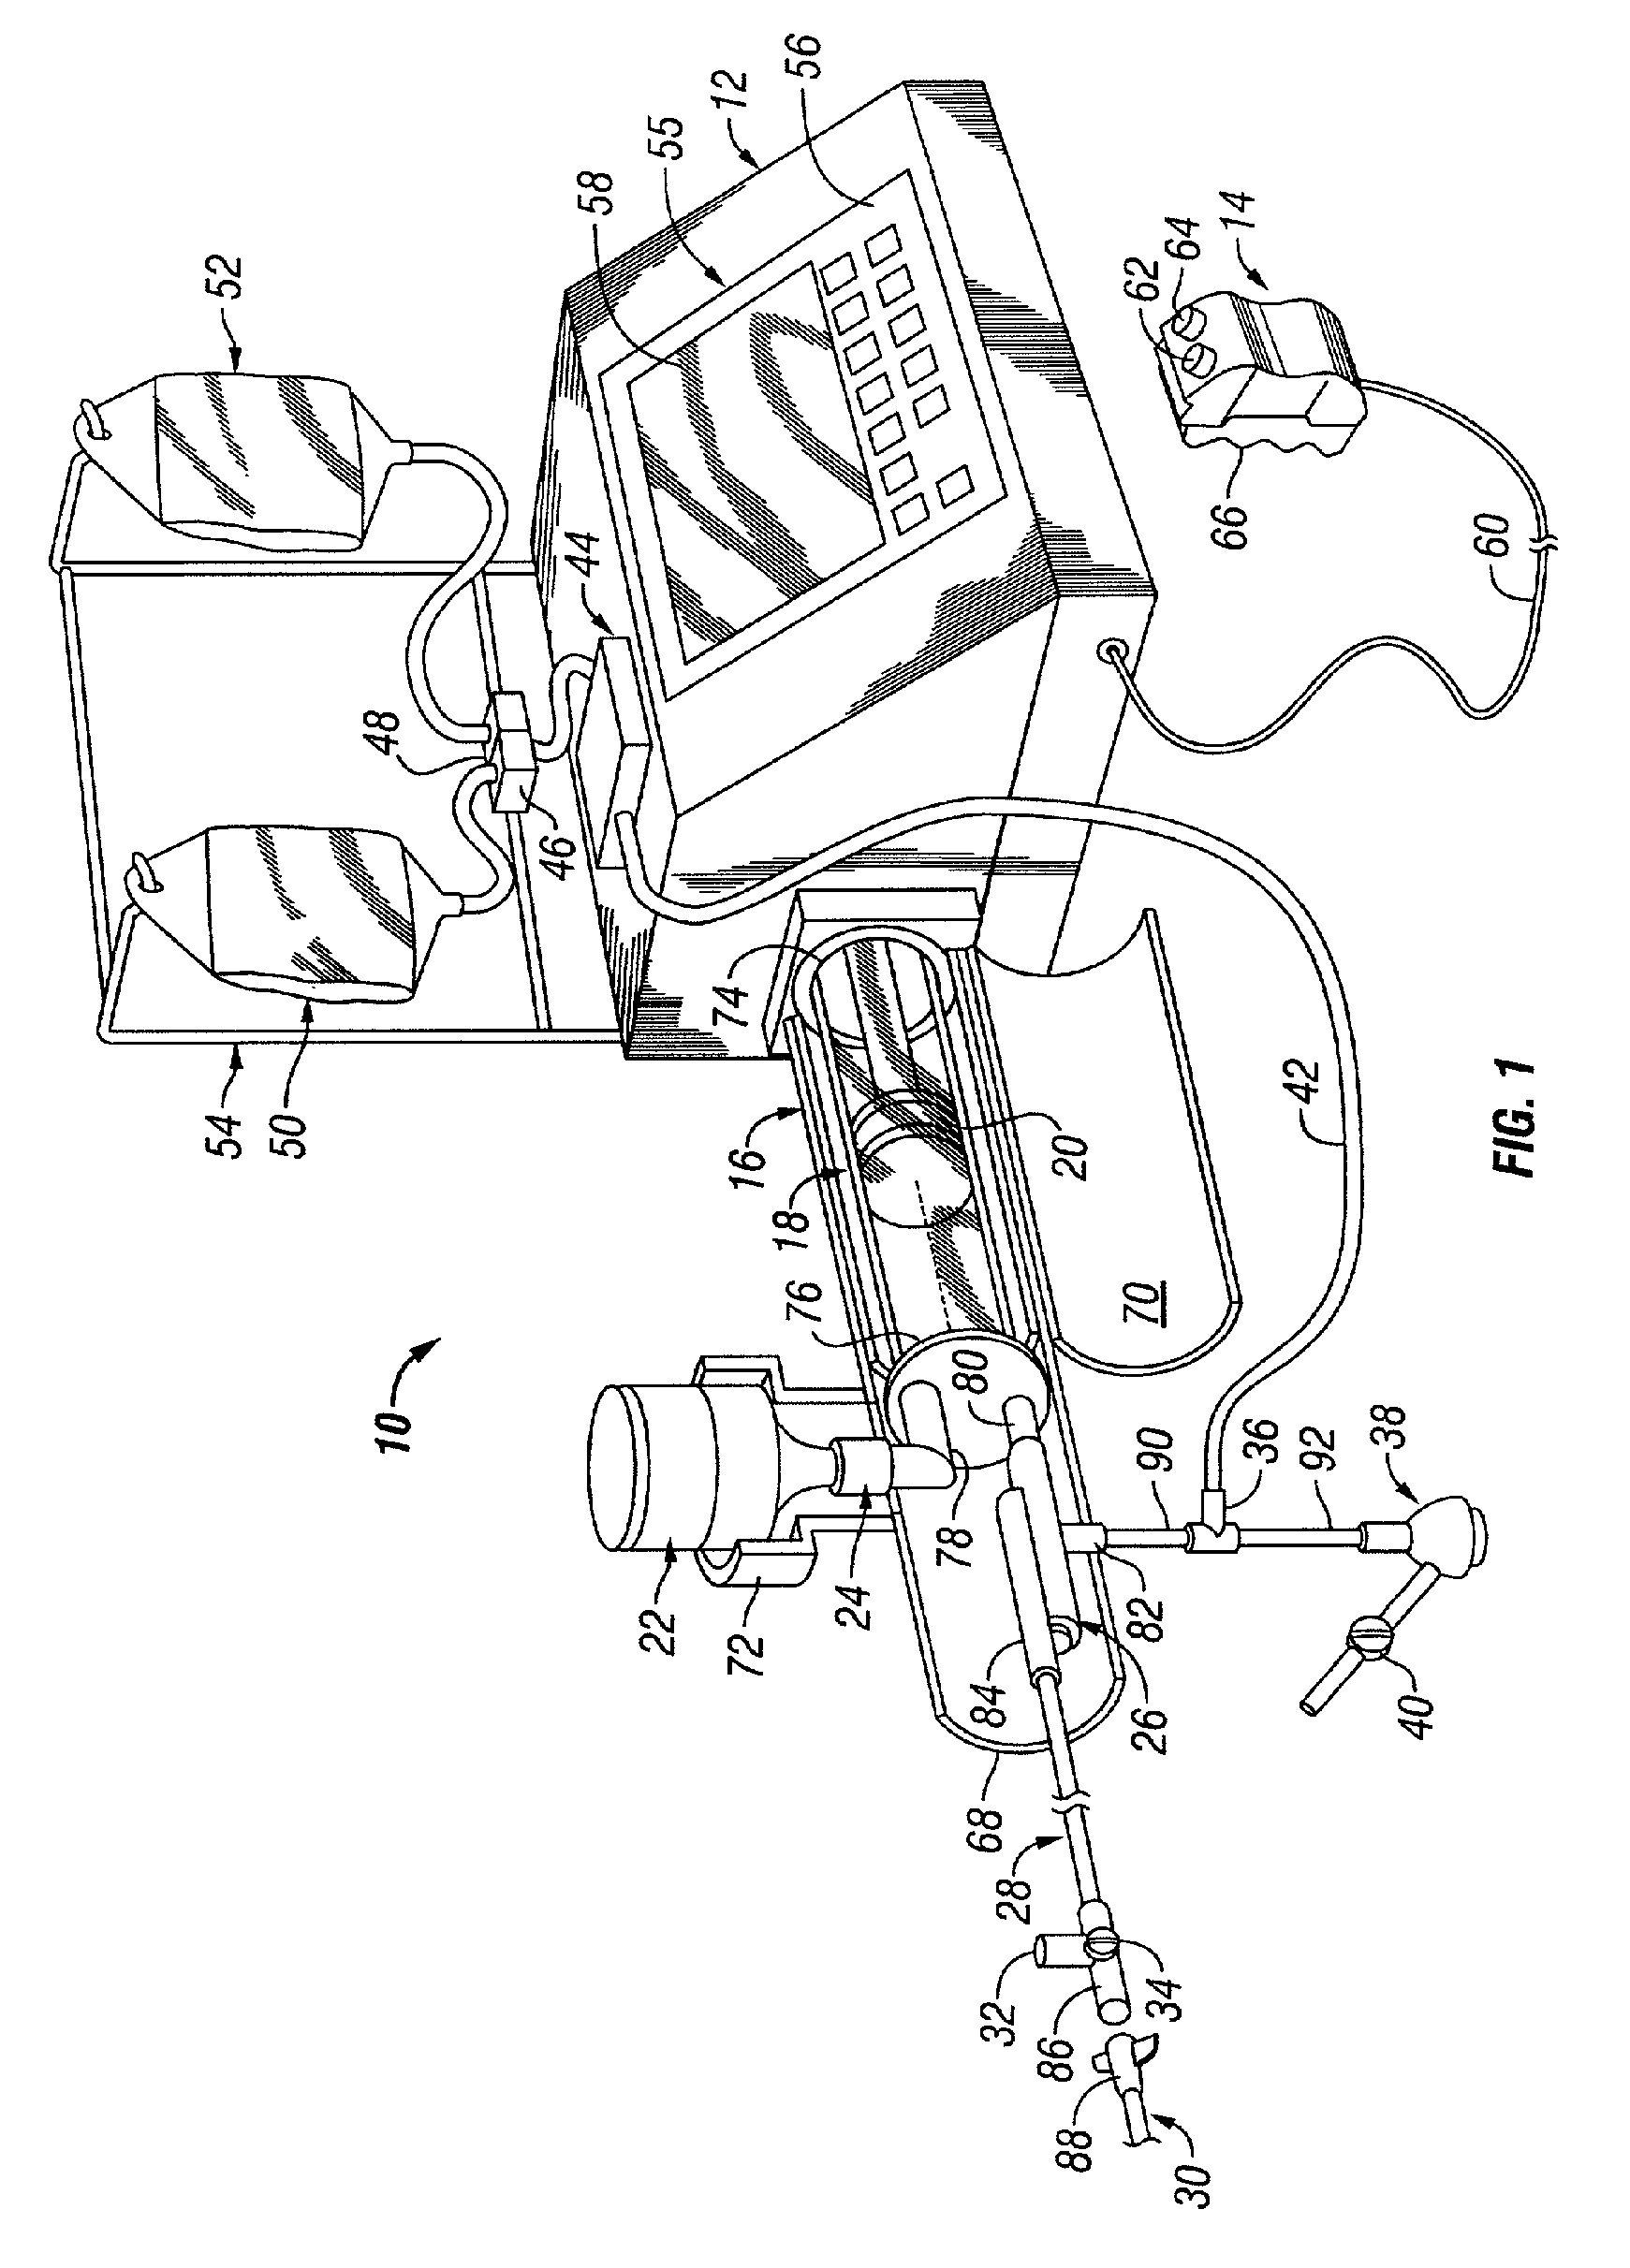 Angiographic Injector System with Multiple Processor Redundancy